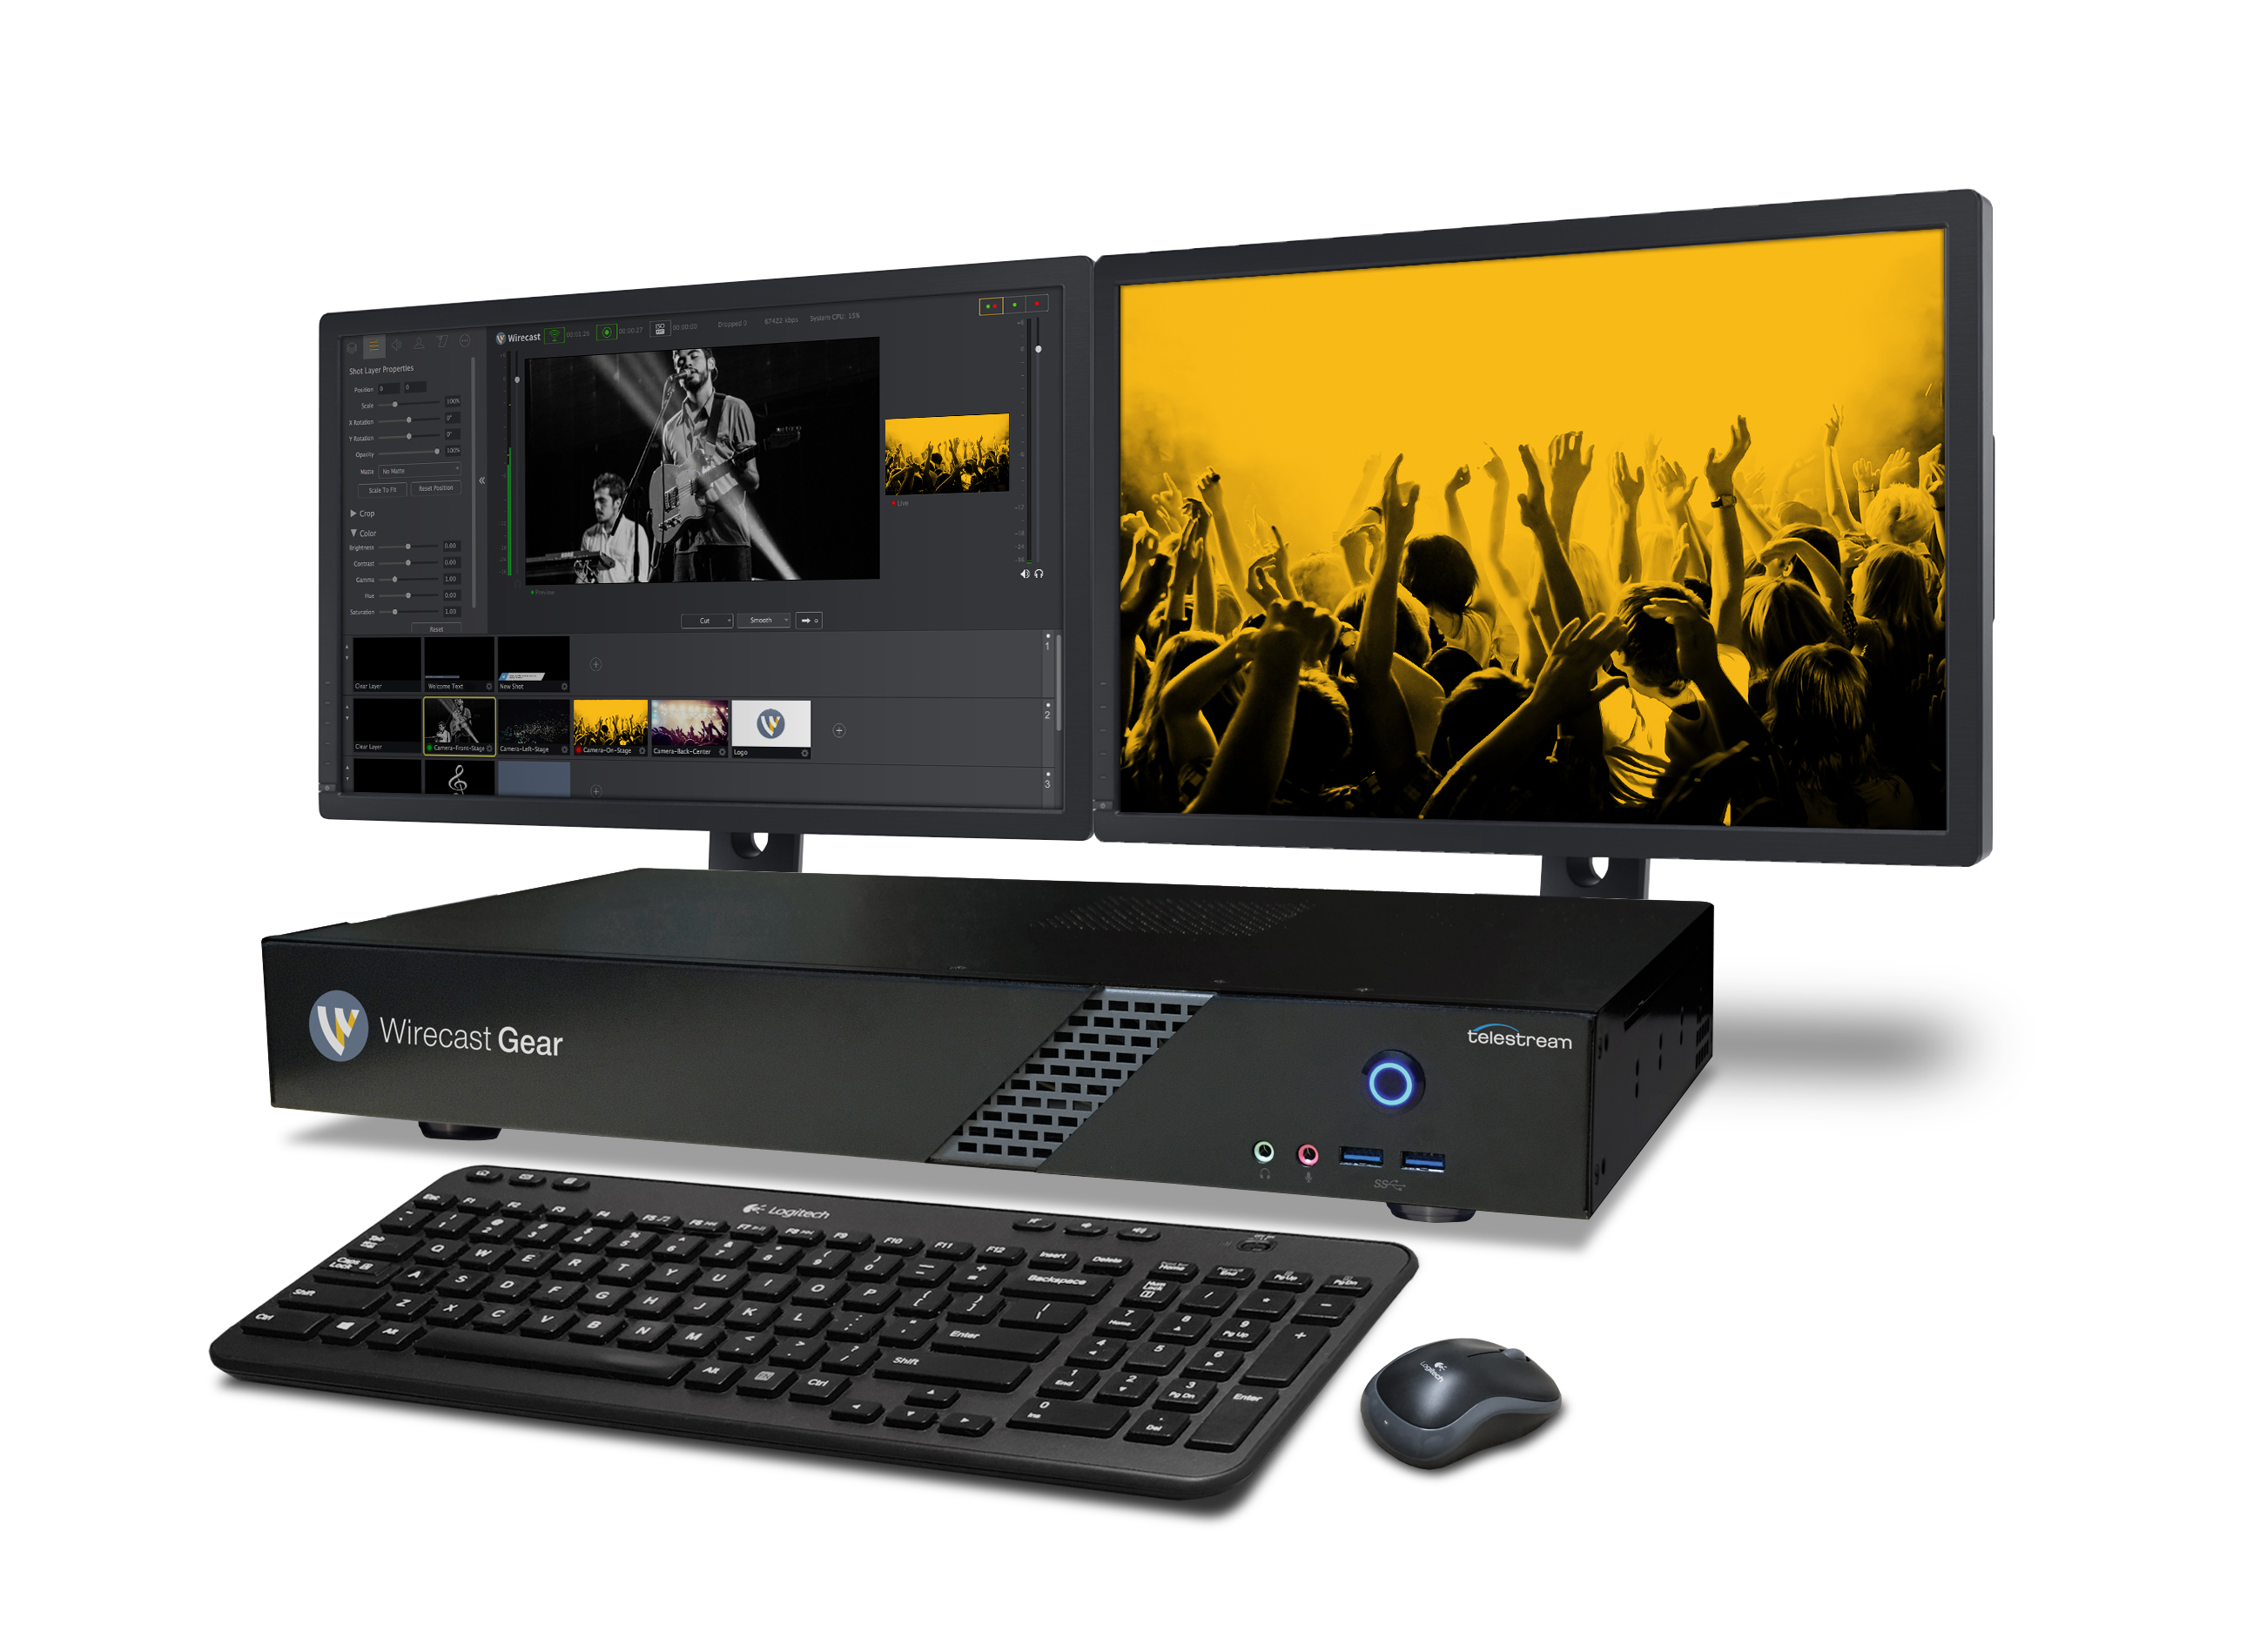 Introducing Wirecast Gear live streaming production system